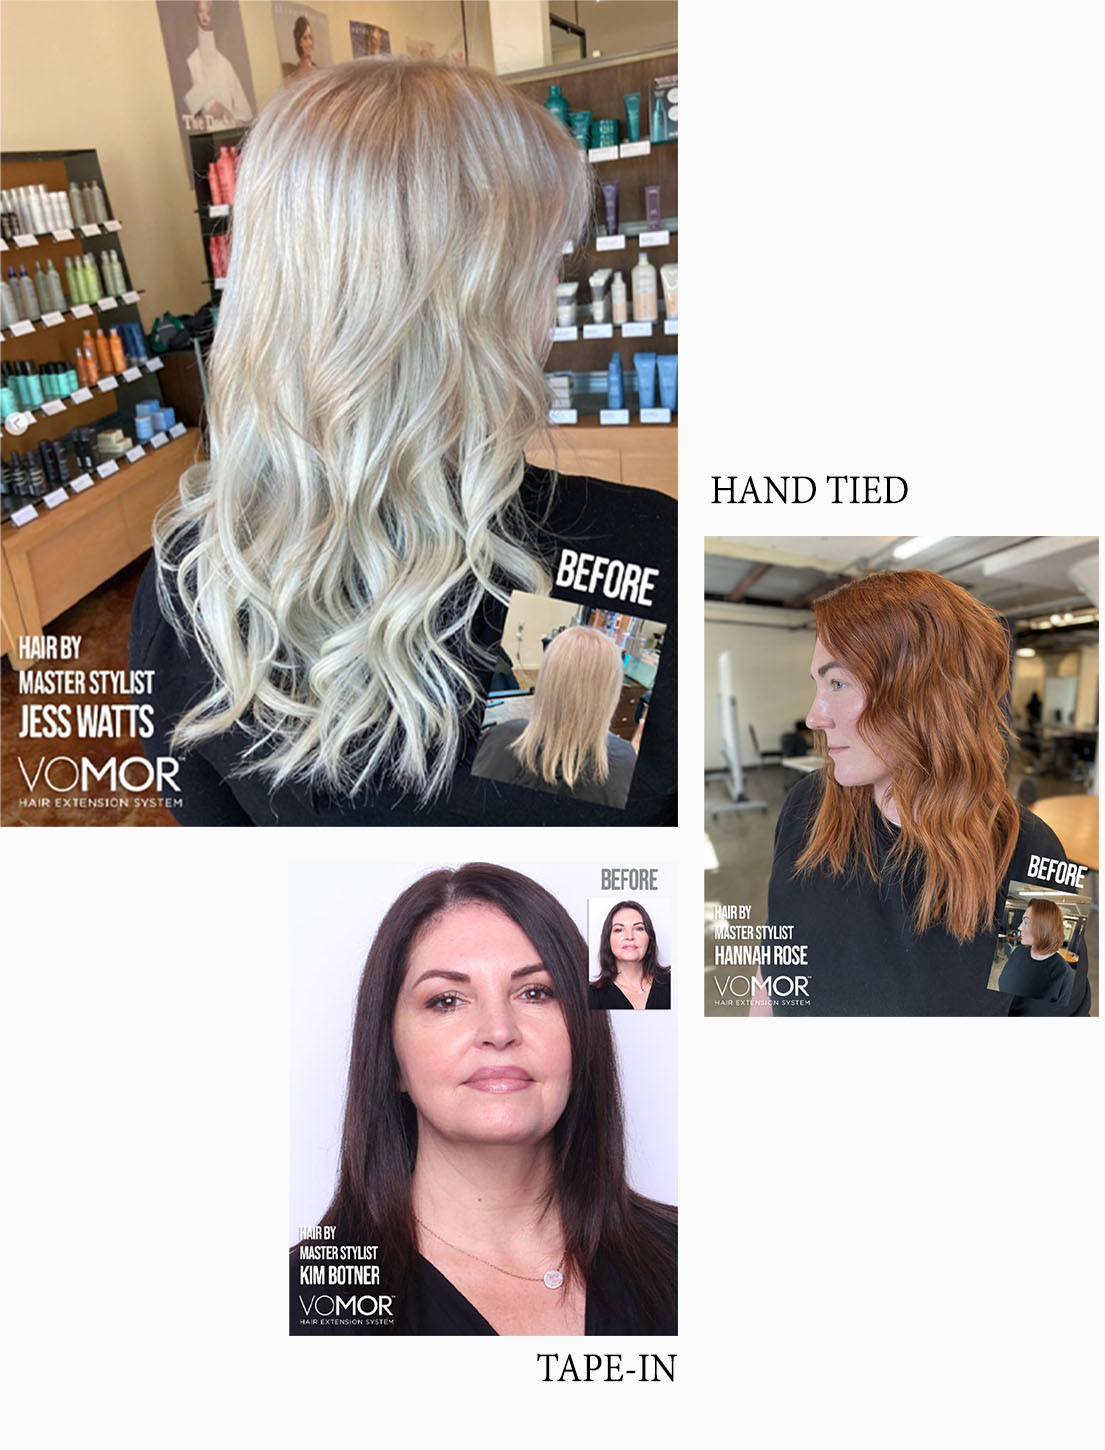 Images of before and after of vomor hair extensions